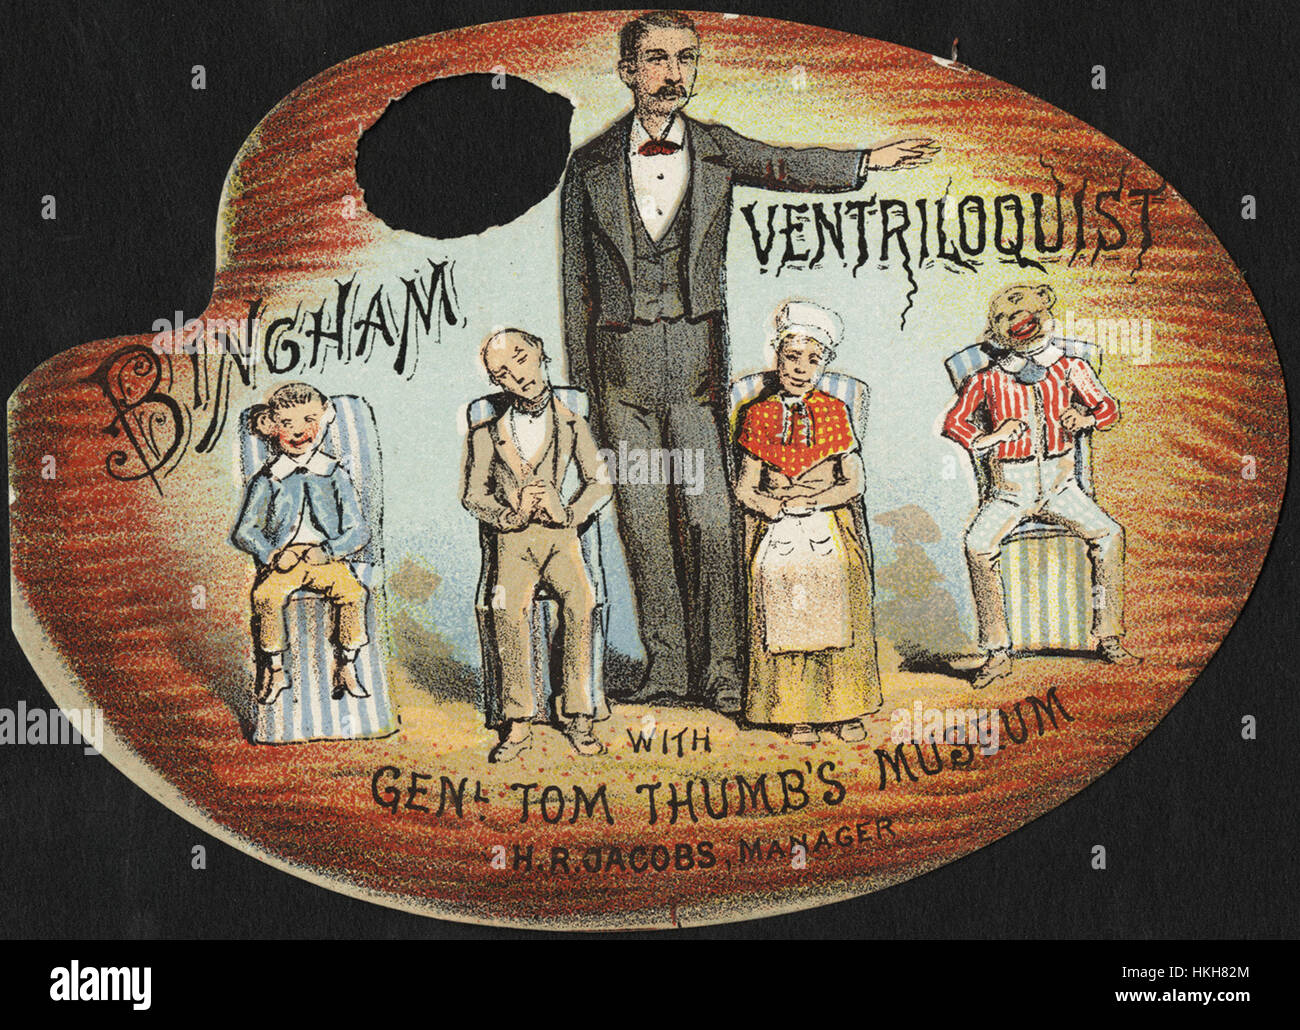 Bingham ventriloquist with Genl. Tom Thumb's Museum, H. R. Jacobs, manager Stock Photo